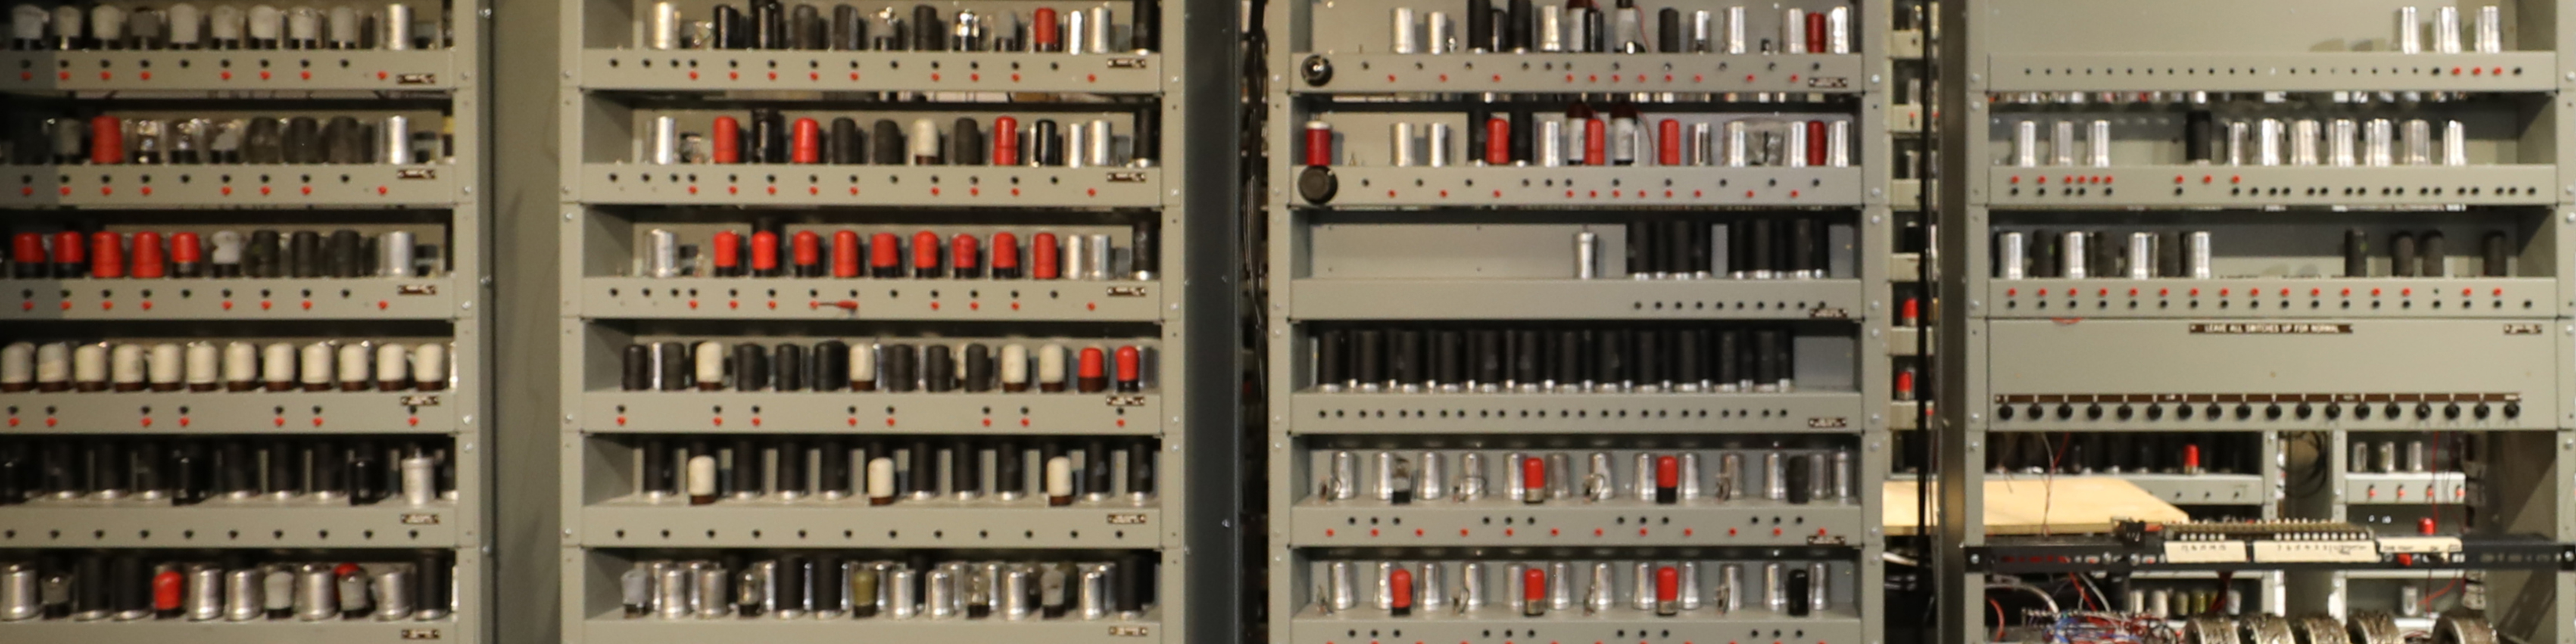 Detail of a recreation of the EDSAC computer, with valves in red and grey on long shelves